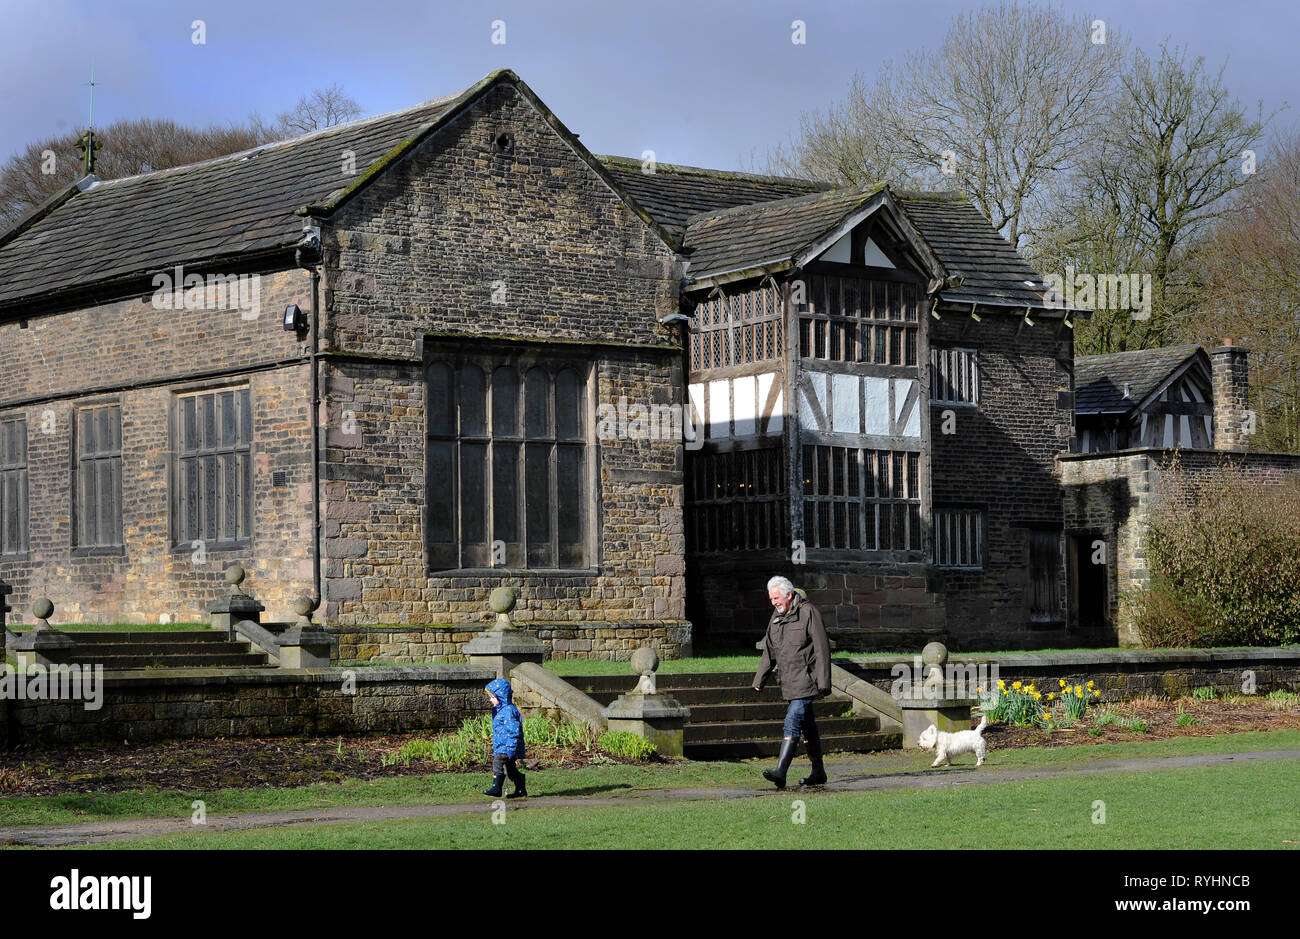 Bolton, Lancashire, UK. 14th Mar, 2019. A mix of sunshine and showers on a blustery day in Smithills Country Park, Bolton, Lancashire. The changeable weather is set to continue until the weekend in the North West of England. A family out for a stroll in the grounds of the historic Smithills Hall. Picture by Paul heres, Thursday March 14, 2019 Credit: Paul Heyes/Alamy Live News Stock Photo